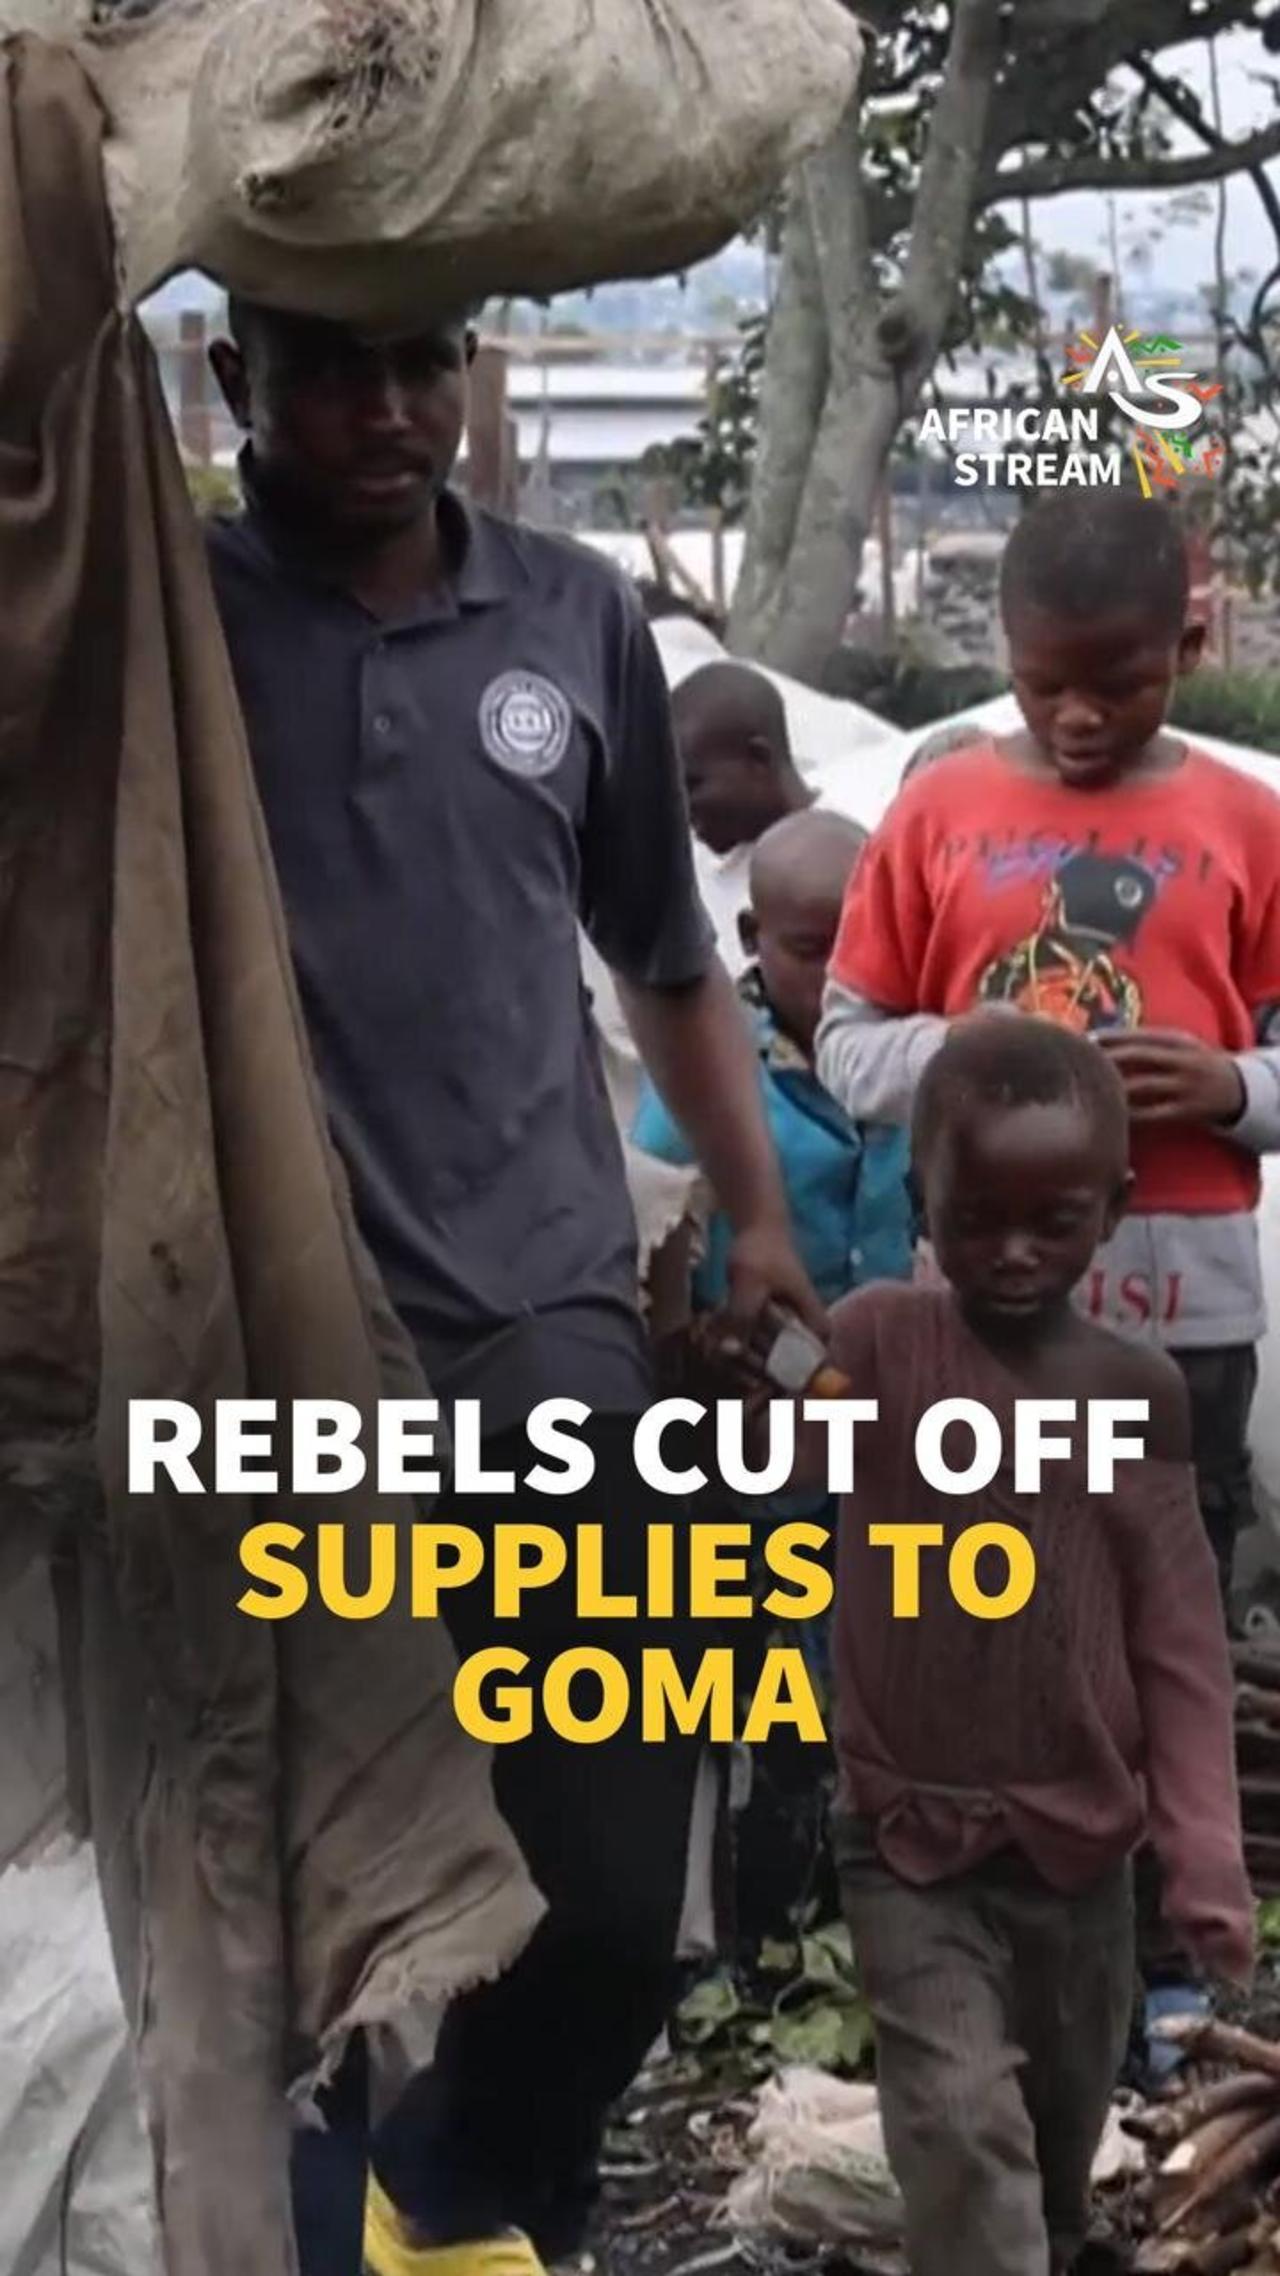 REBELS CUT OFF SUPPLIES TO GOMA